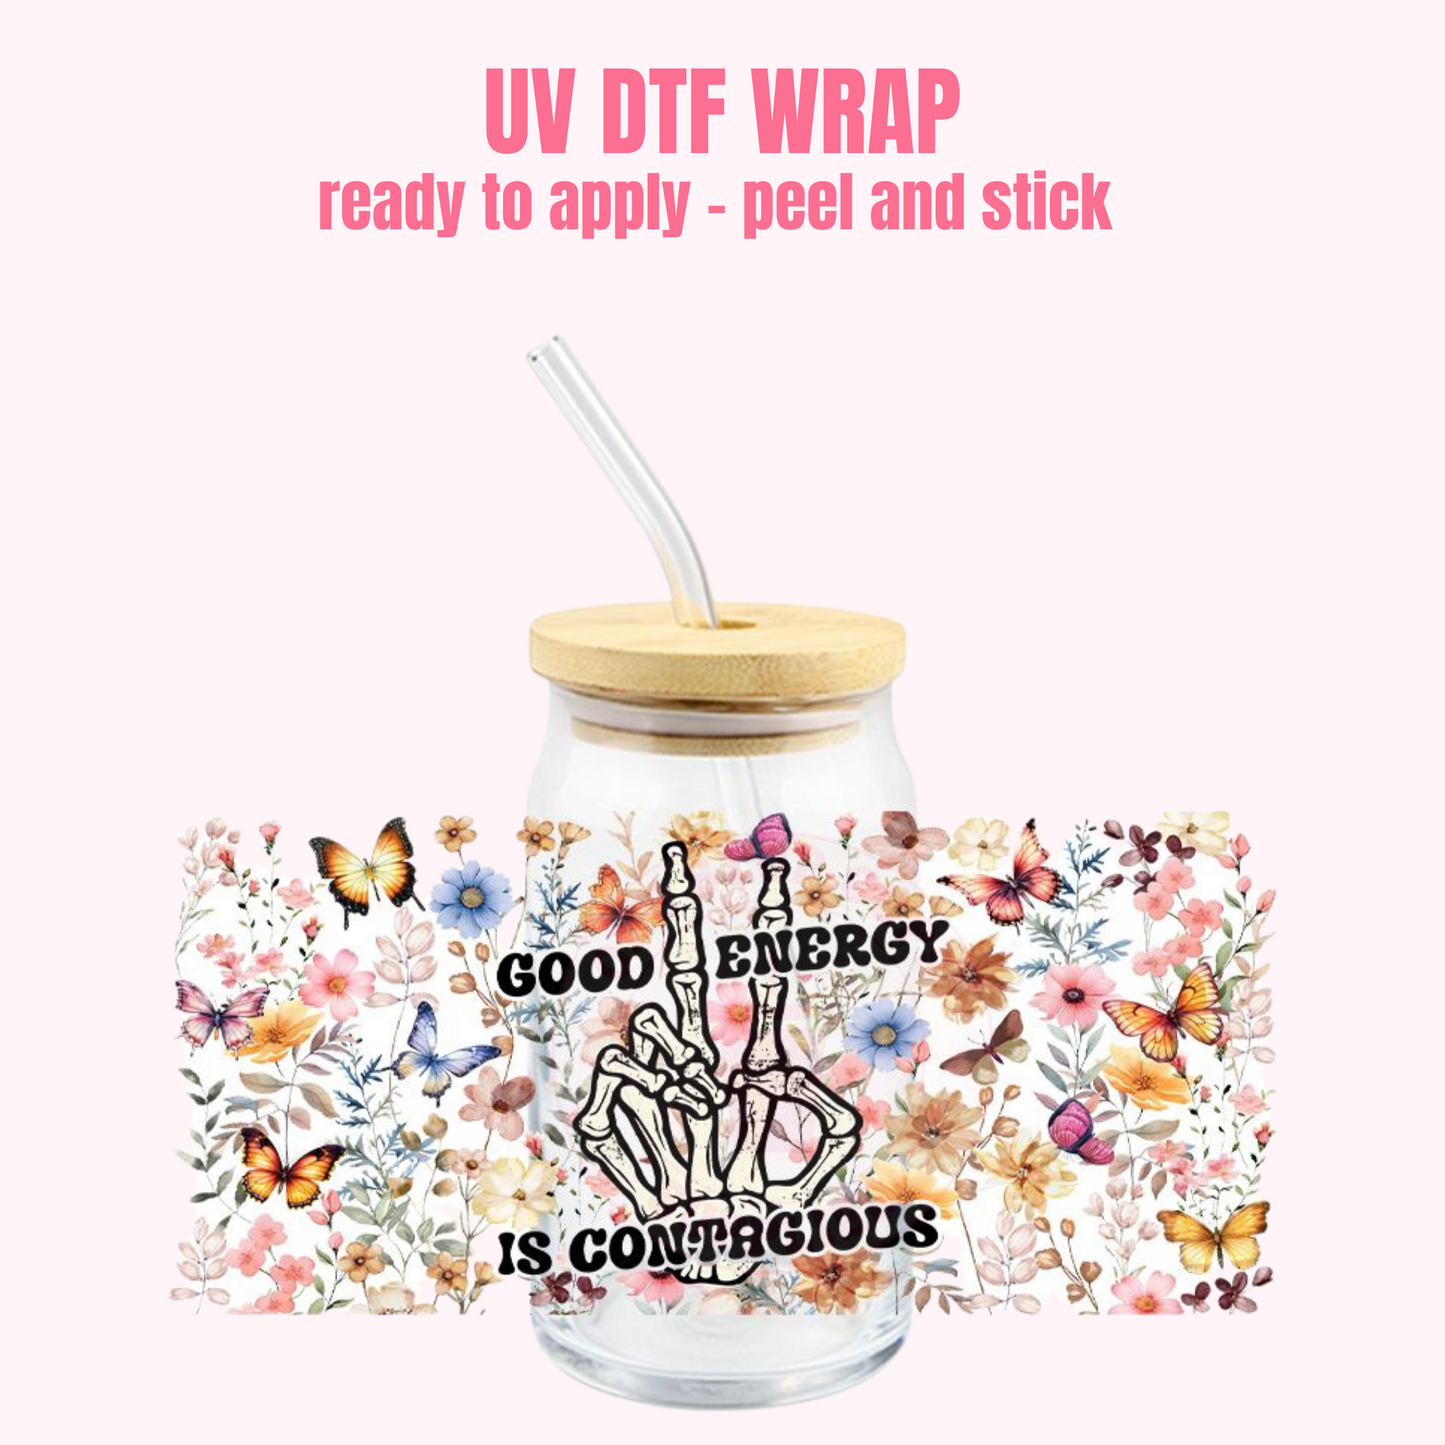 UV DTF CUP WRAP Good Energy is Contagious SL19